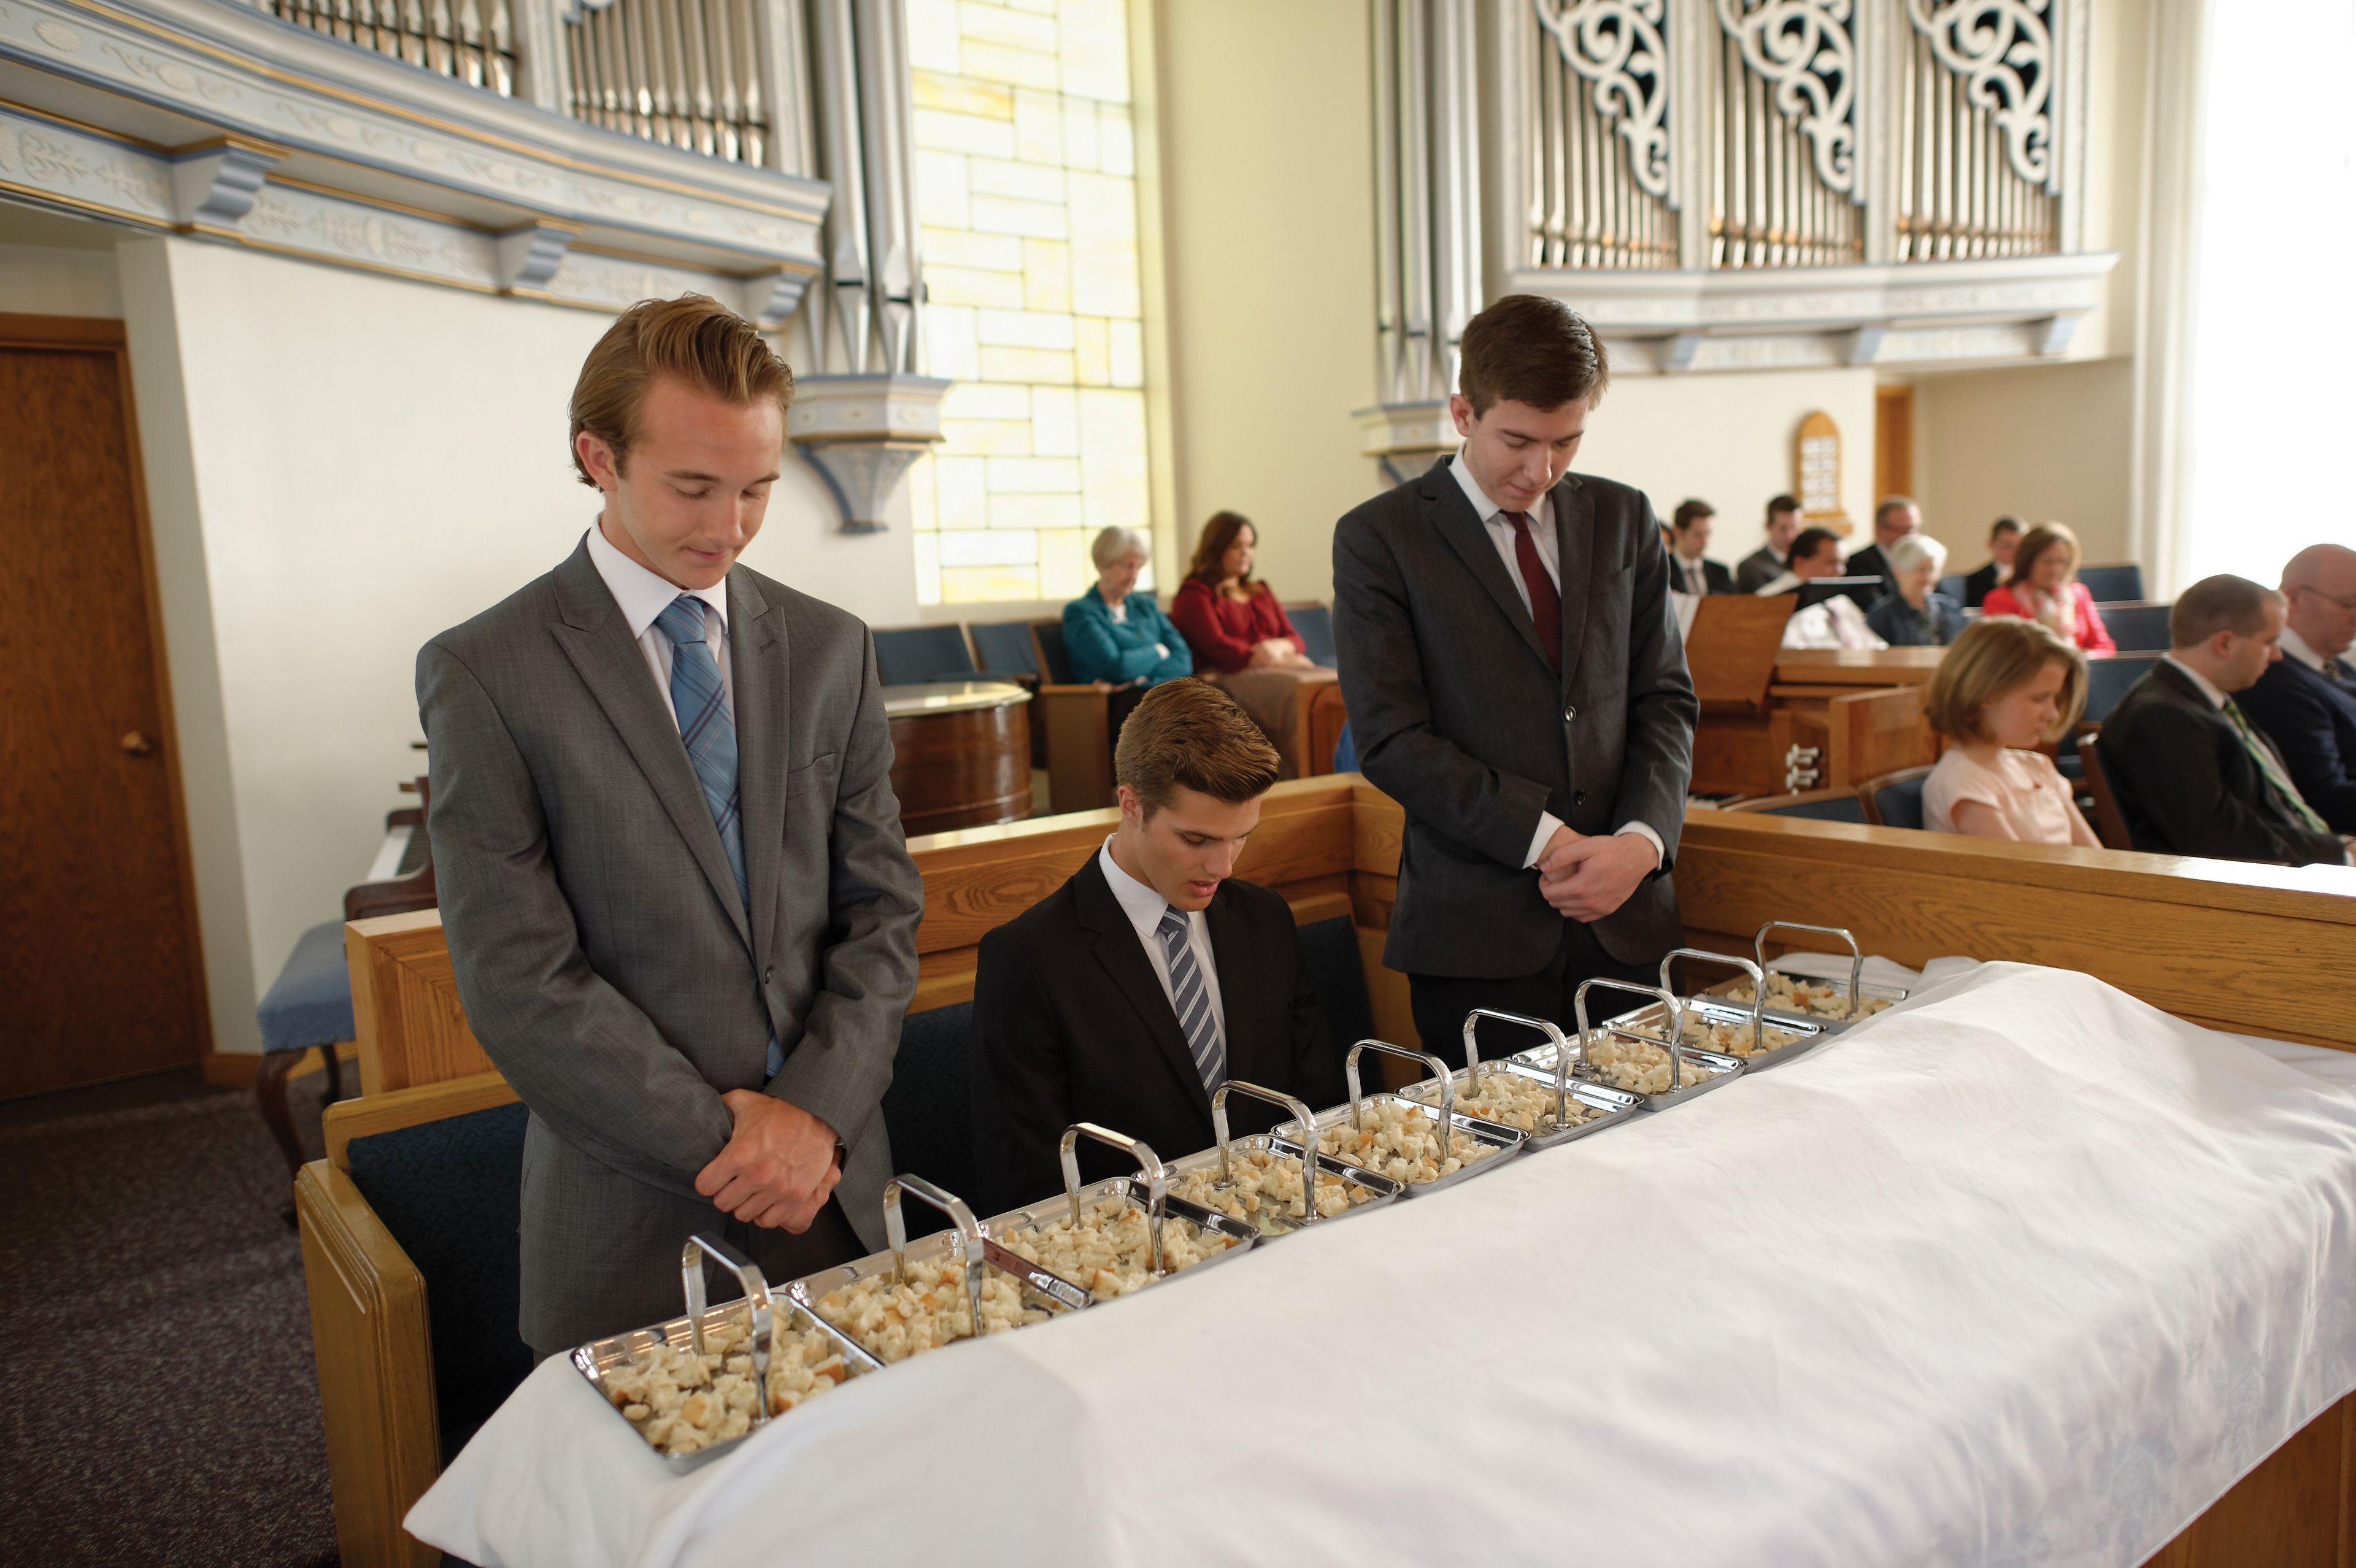 Three young men blessing the sacrament bread for the congregation.